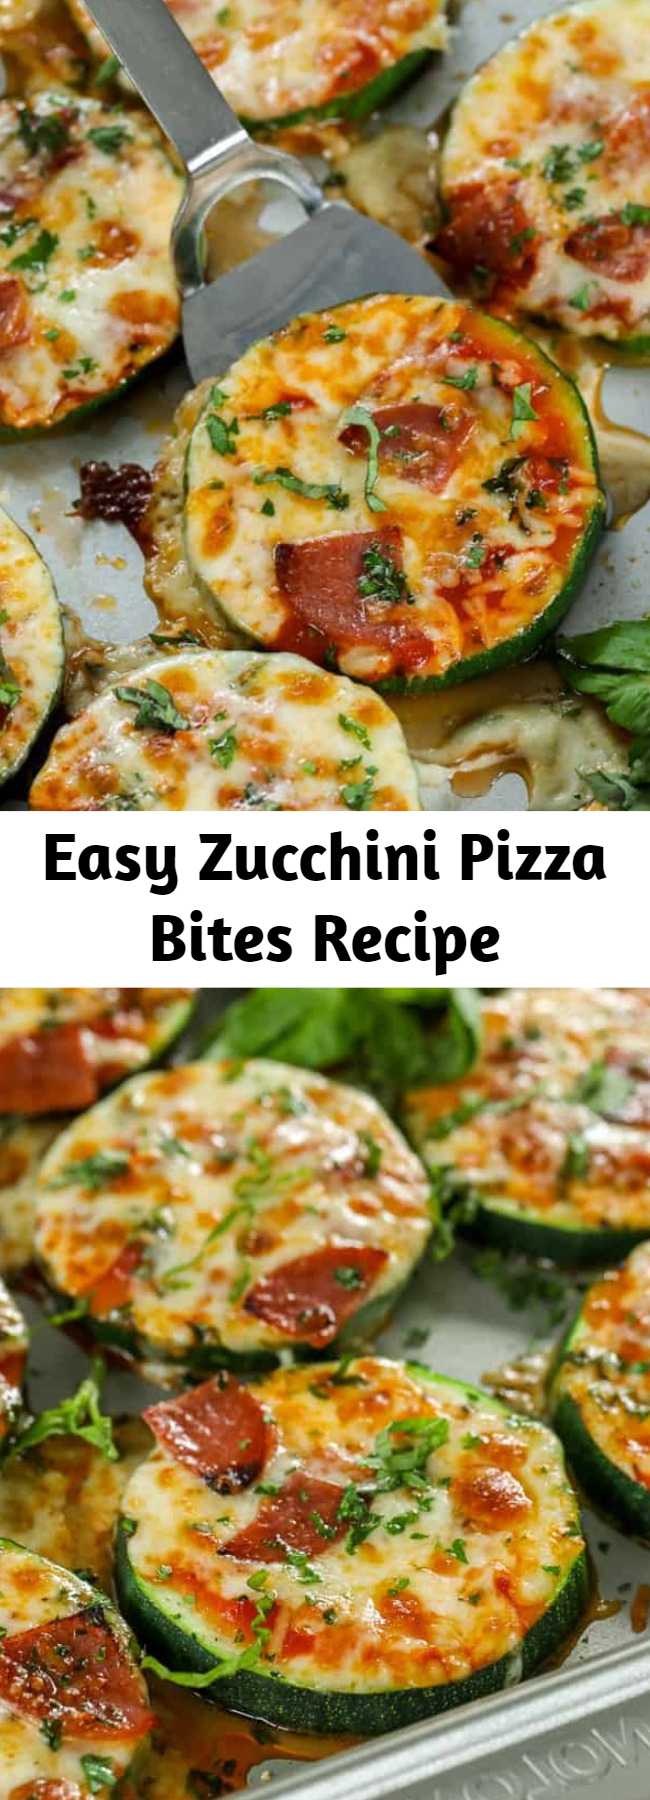 Easy Zucchini Pizza Bites Recipe - Zucchini Pizza Bites are one of our favorite snacks! These delicious pizza bites are topped with our favorite toppings and plenty of cheese for the perfect low carb pizza fix! #keto #zucchini #zucchinipizzabites #zucchinipizza #pizzabites